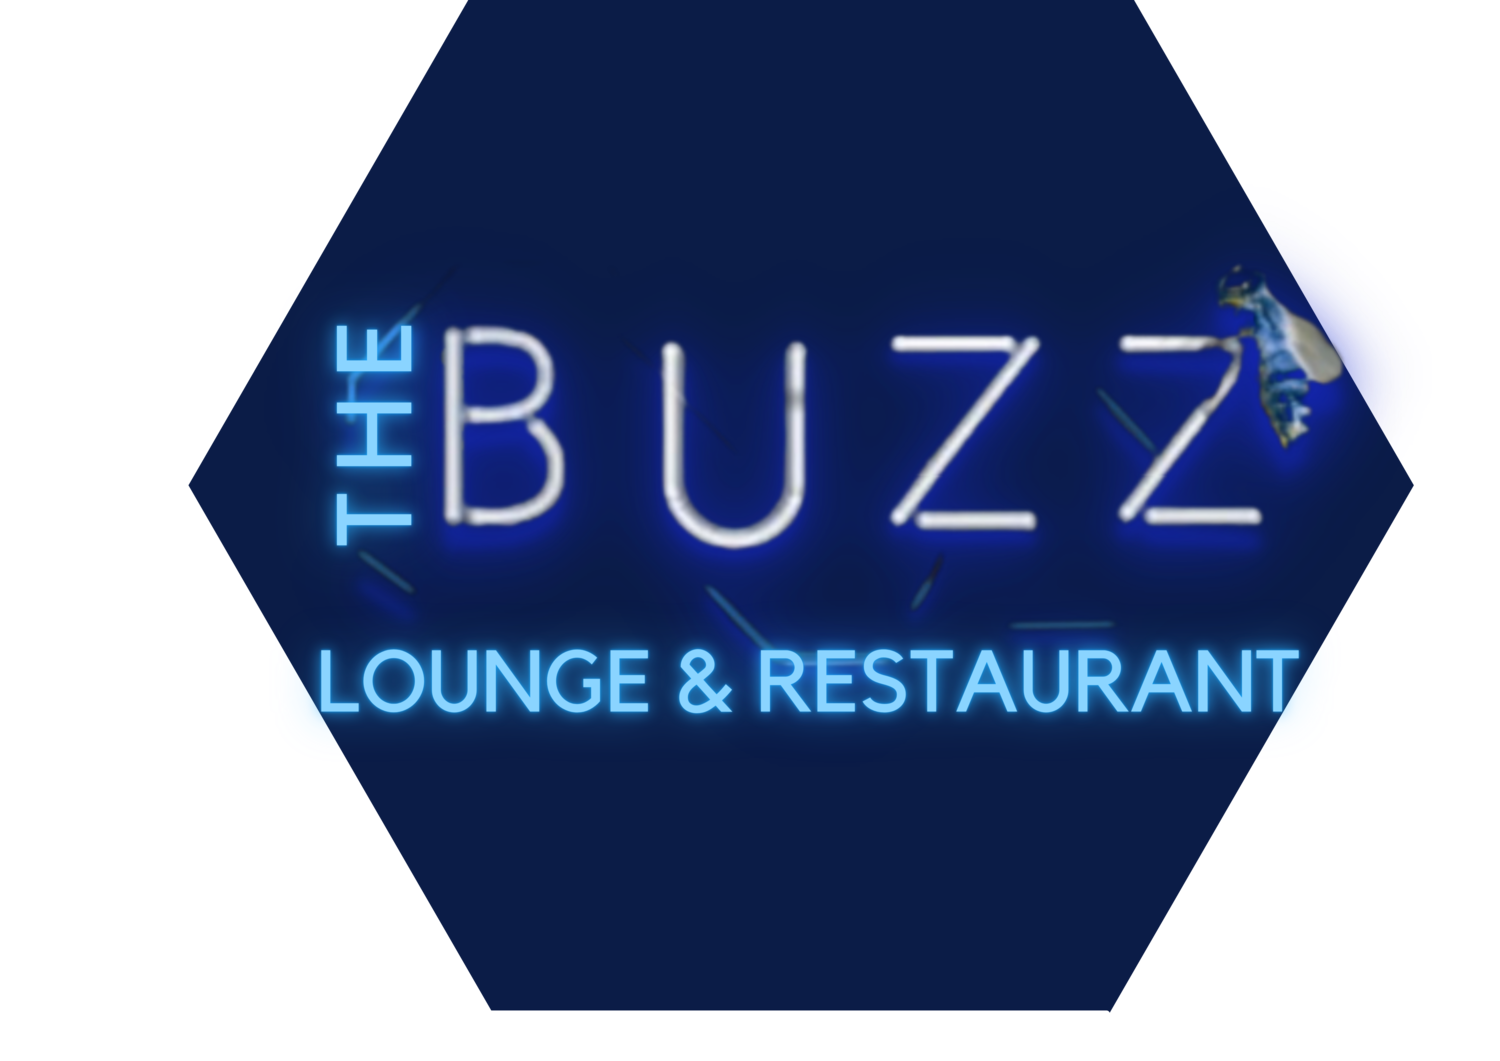 The Buzz Lounge